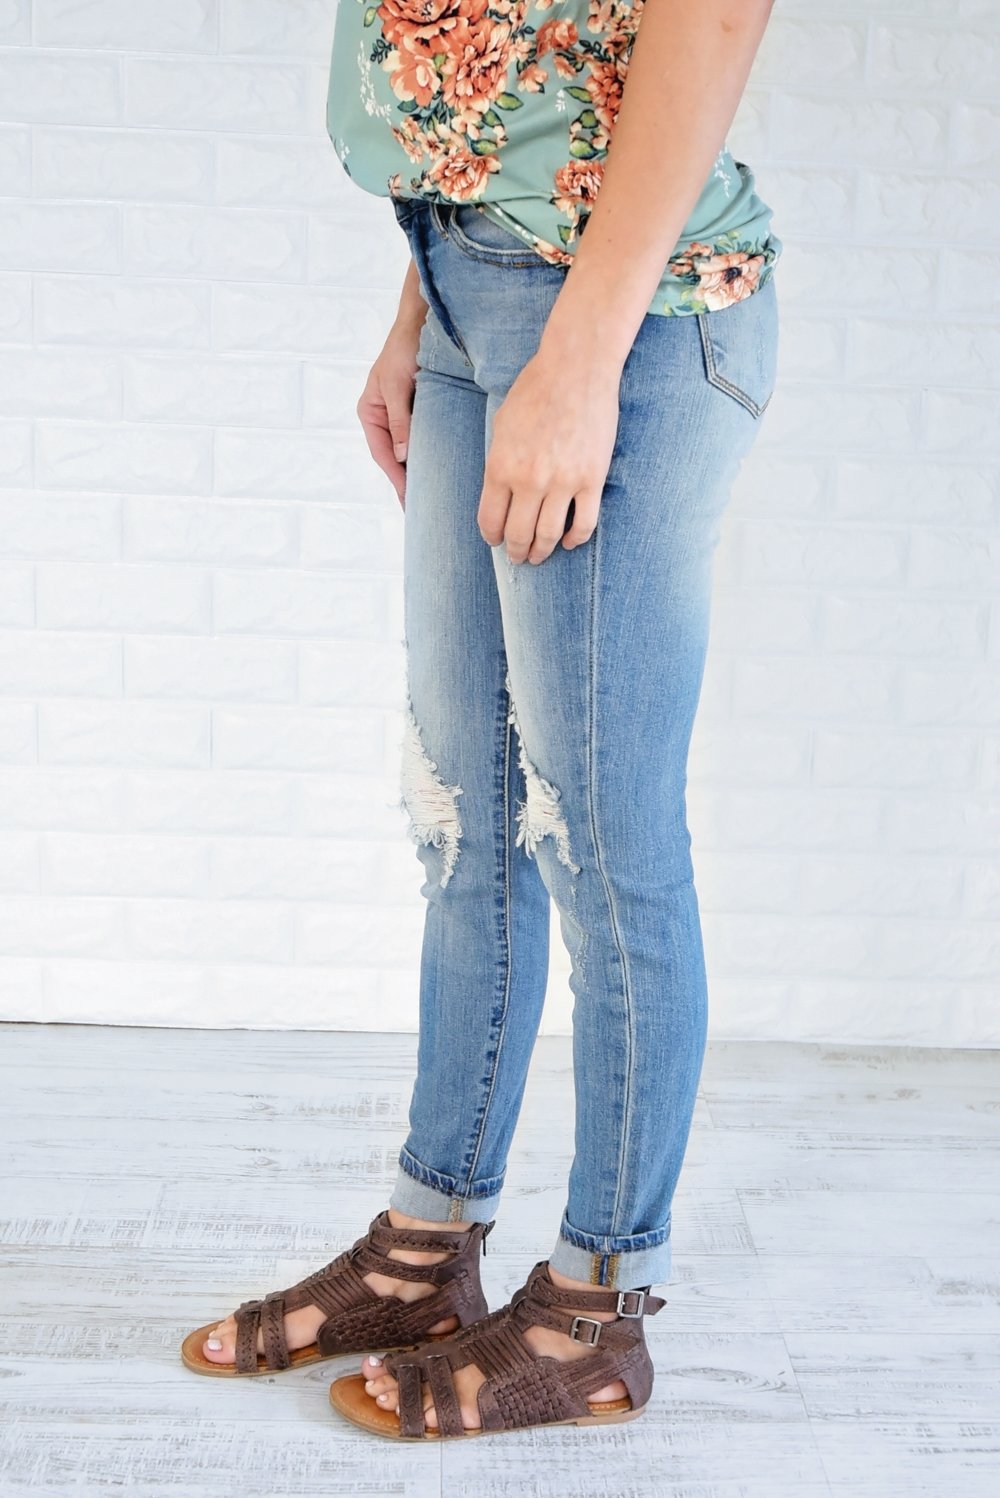 Kan Can Jeans ~ Abigail Wash